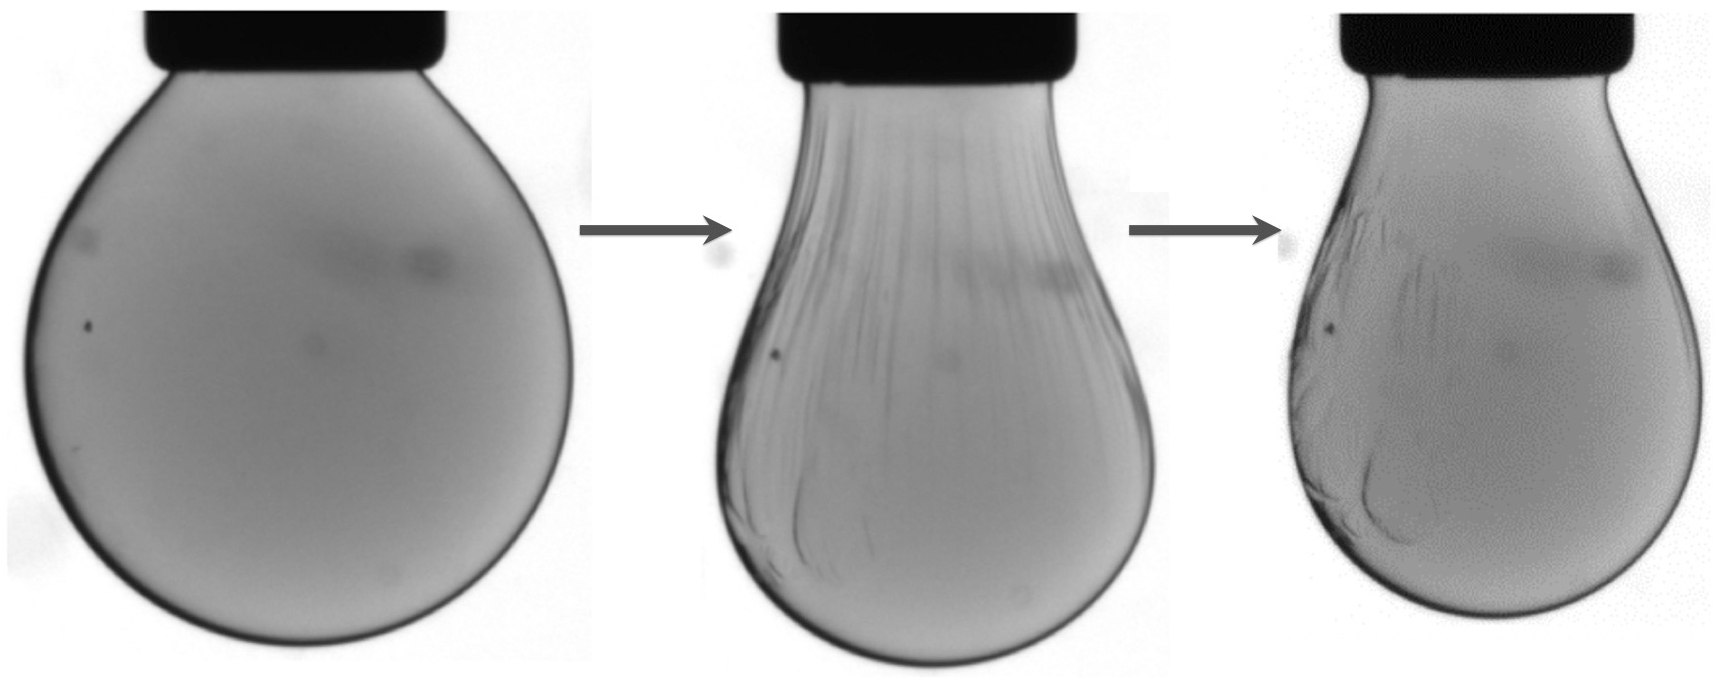 Image sequence - Nanocrystals within a liquid droplet that is injected into an oily solution (left) are chemically compressed into a solid-like “jammed” 2D state (middle) – which causes wrinkles to form on the surface of the droplet – and then revert to a relaxed, liquid-like state (right) in which the wrinkles smooth out. (Credit: Berkeley Lab)